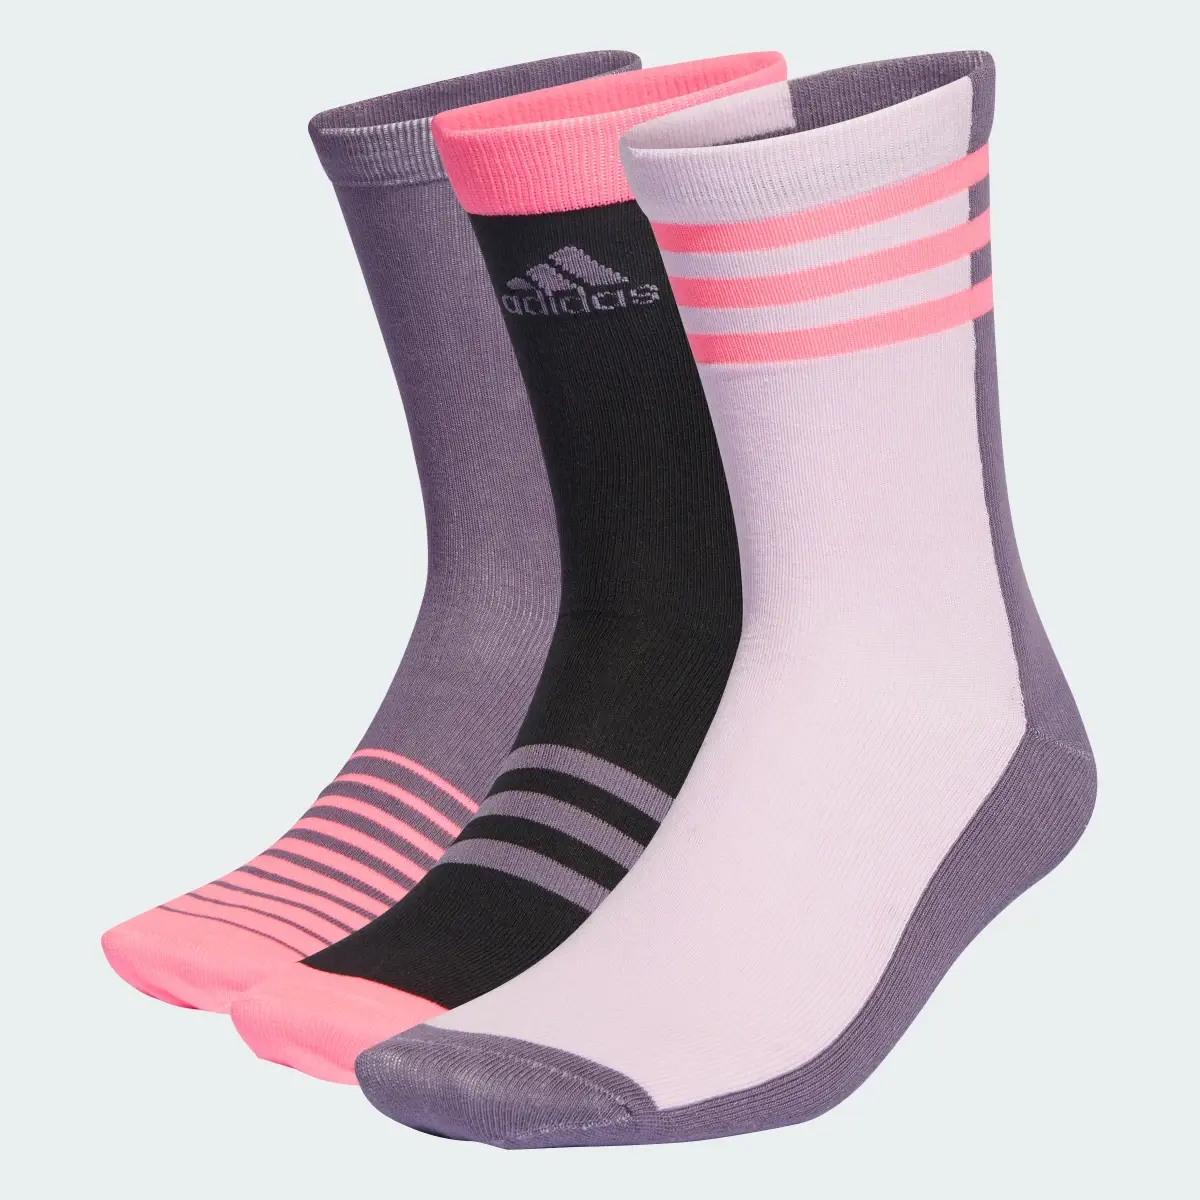 Adidas Chaussettes mi-mollet International Girls Day (3 paires). 2